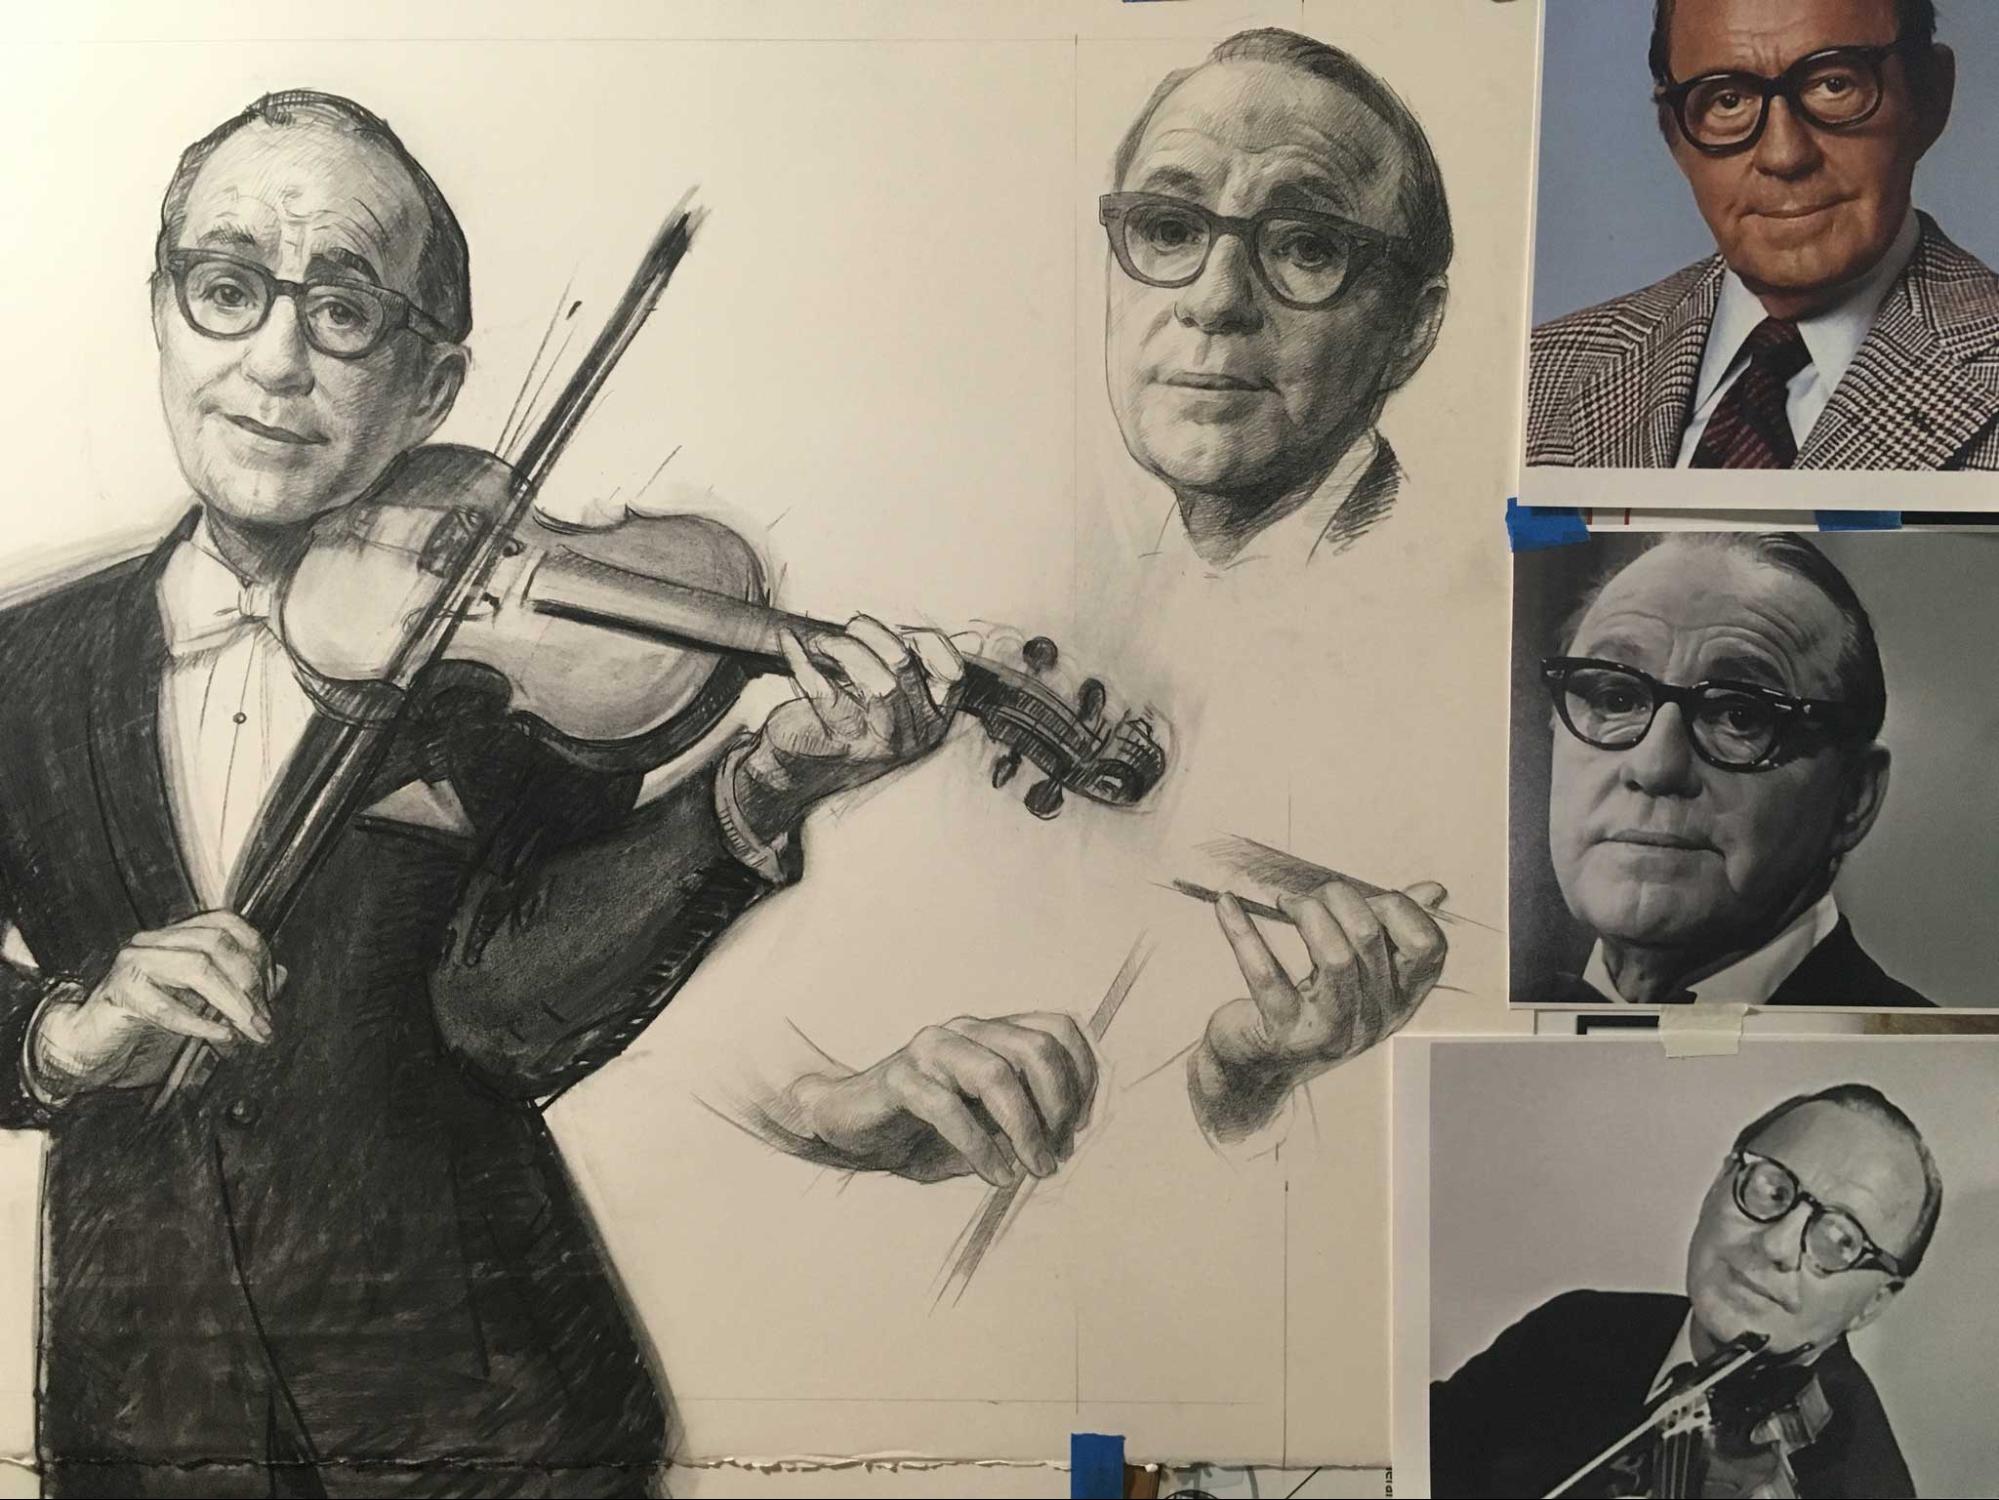 References for Watwood's posthumous portrait of Jack Benny